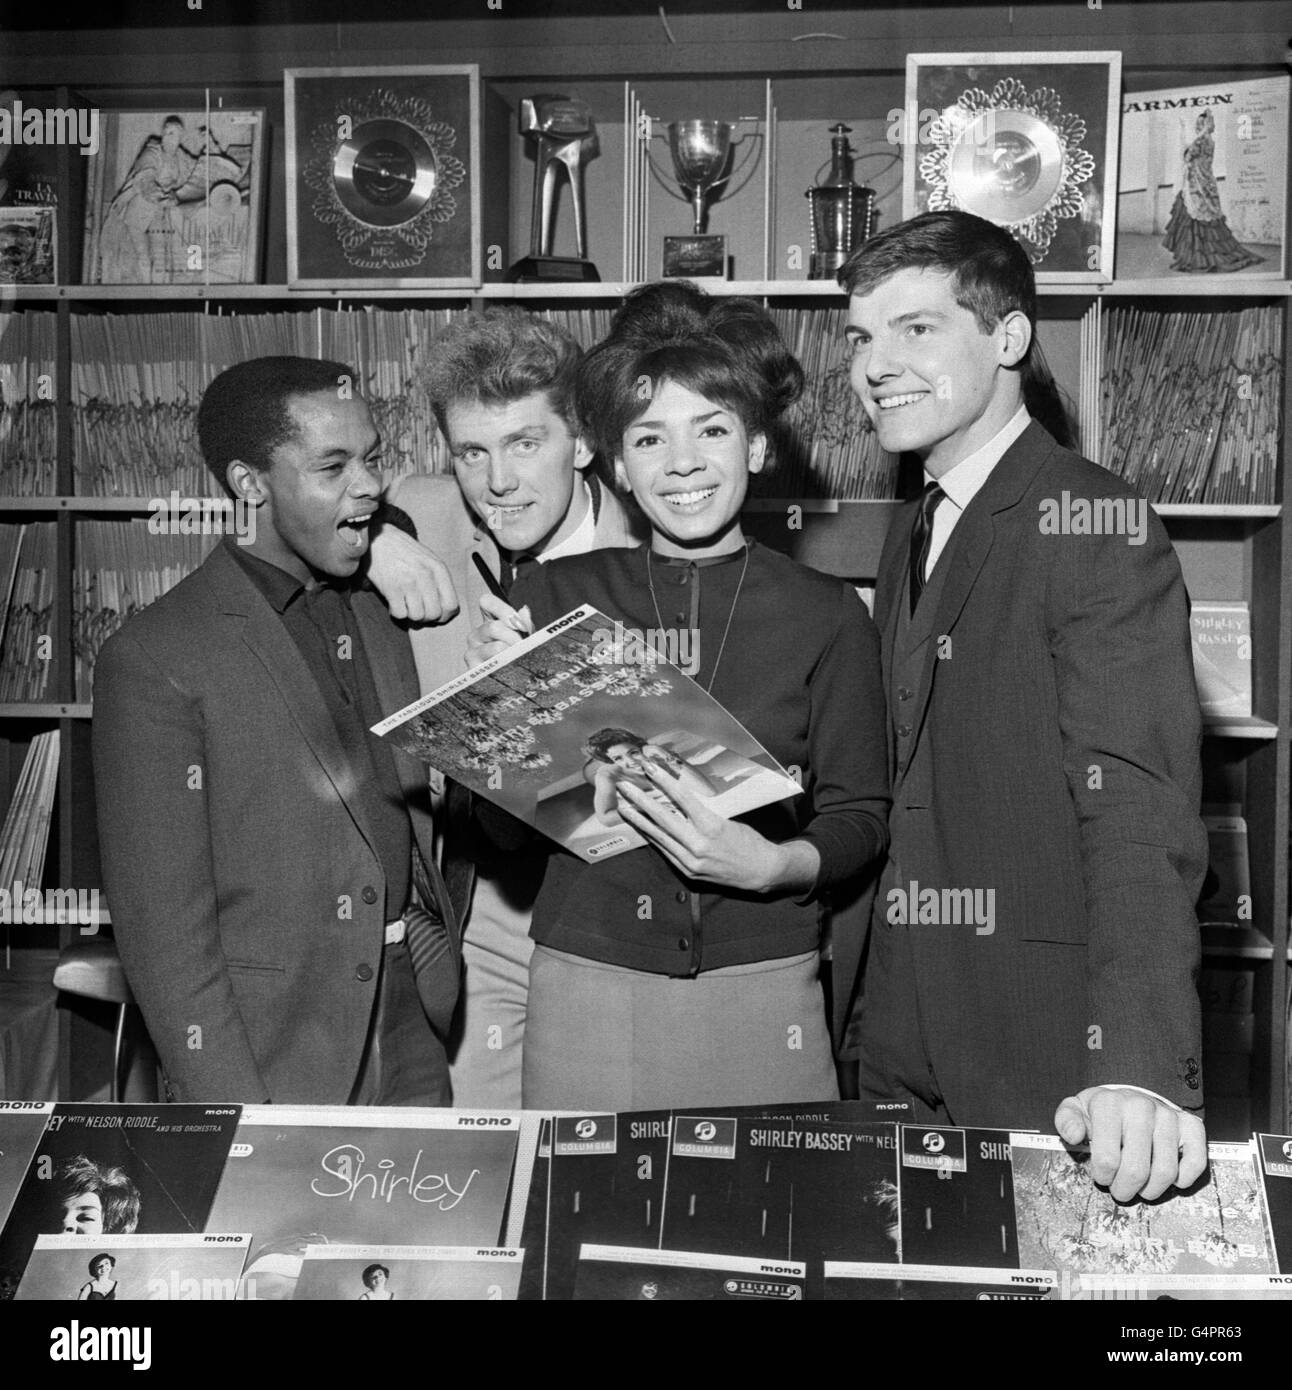 Singing star Shirley Bassey autographs the sleeve of one of her own records at the opening of the Shirley Bassey Record Shop in West End Lane, London. Looking on are pop singers (l-r) Danny Williams, Shane Fenton (later Alvin Stardust) and Jess Conrad. Shirley's record shop is an extension of a bookshop owned by her husband, film producer Kenneth Hume. After finishing her season at the Talk of the Town, Shirley Bassey will leave for New York for a five-week engagement in the Persian Room at the Plaza Hotel. This will be followed by a four-week season in cabaret in Sydney Australia. Stock Photo